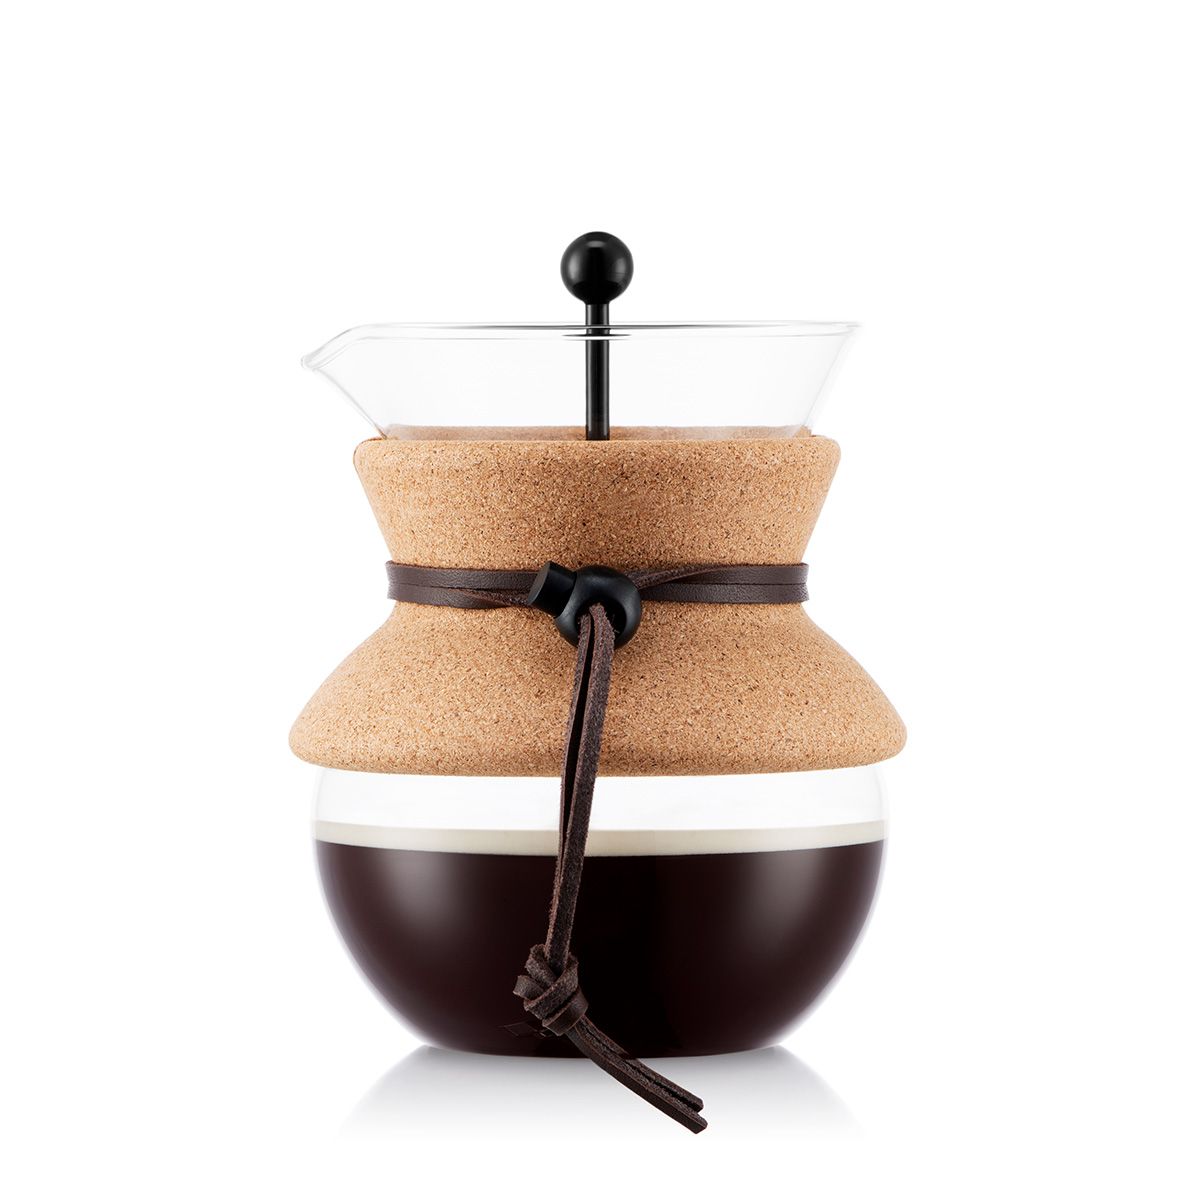 Bodum Pour Over Coffee Maker With Permanent Coffee Filter Cork, 4 Cups